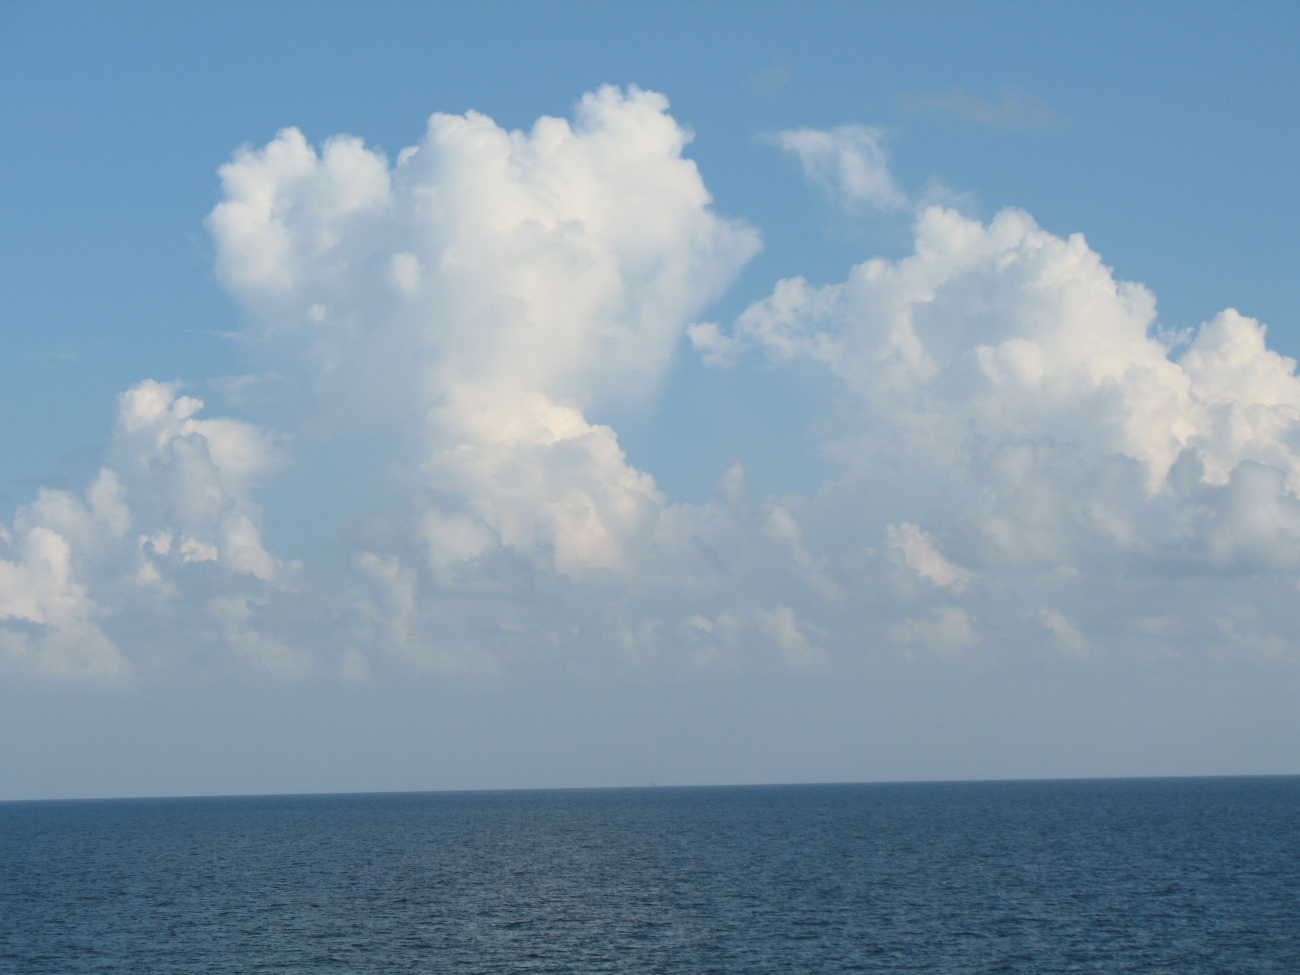 While the TAO buoy streams aft, innocent looking clouds approach